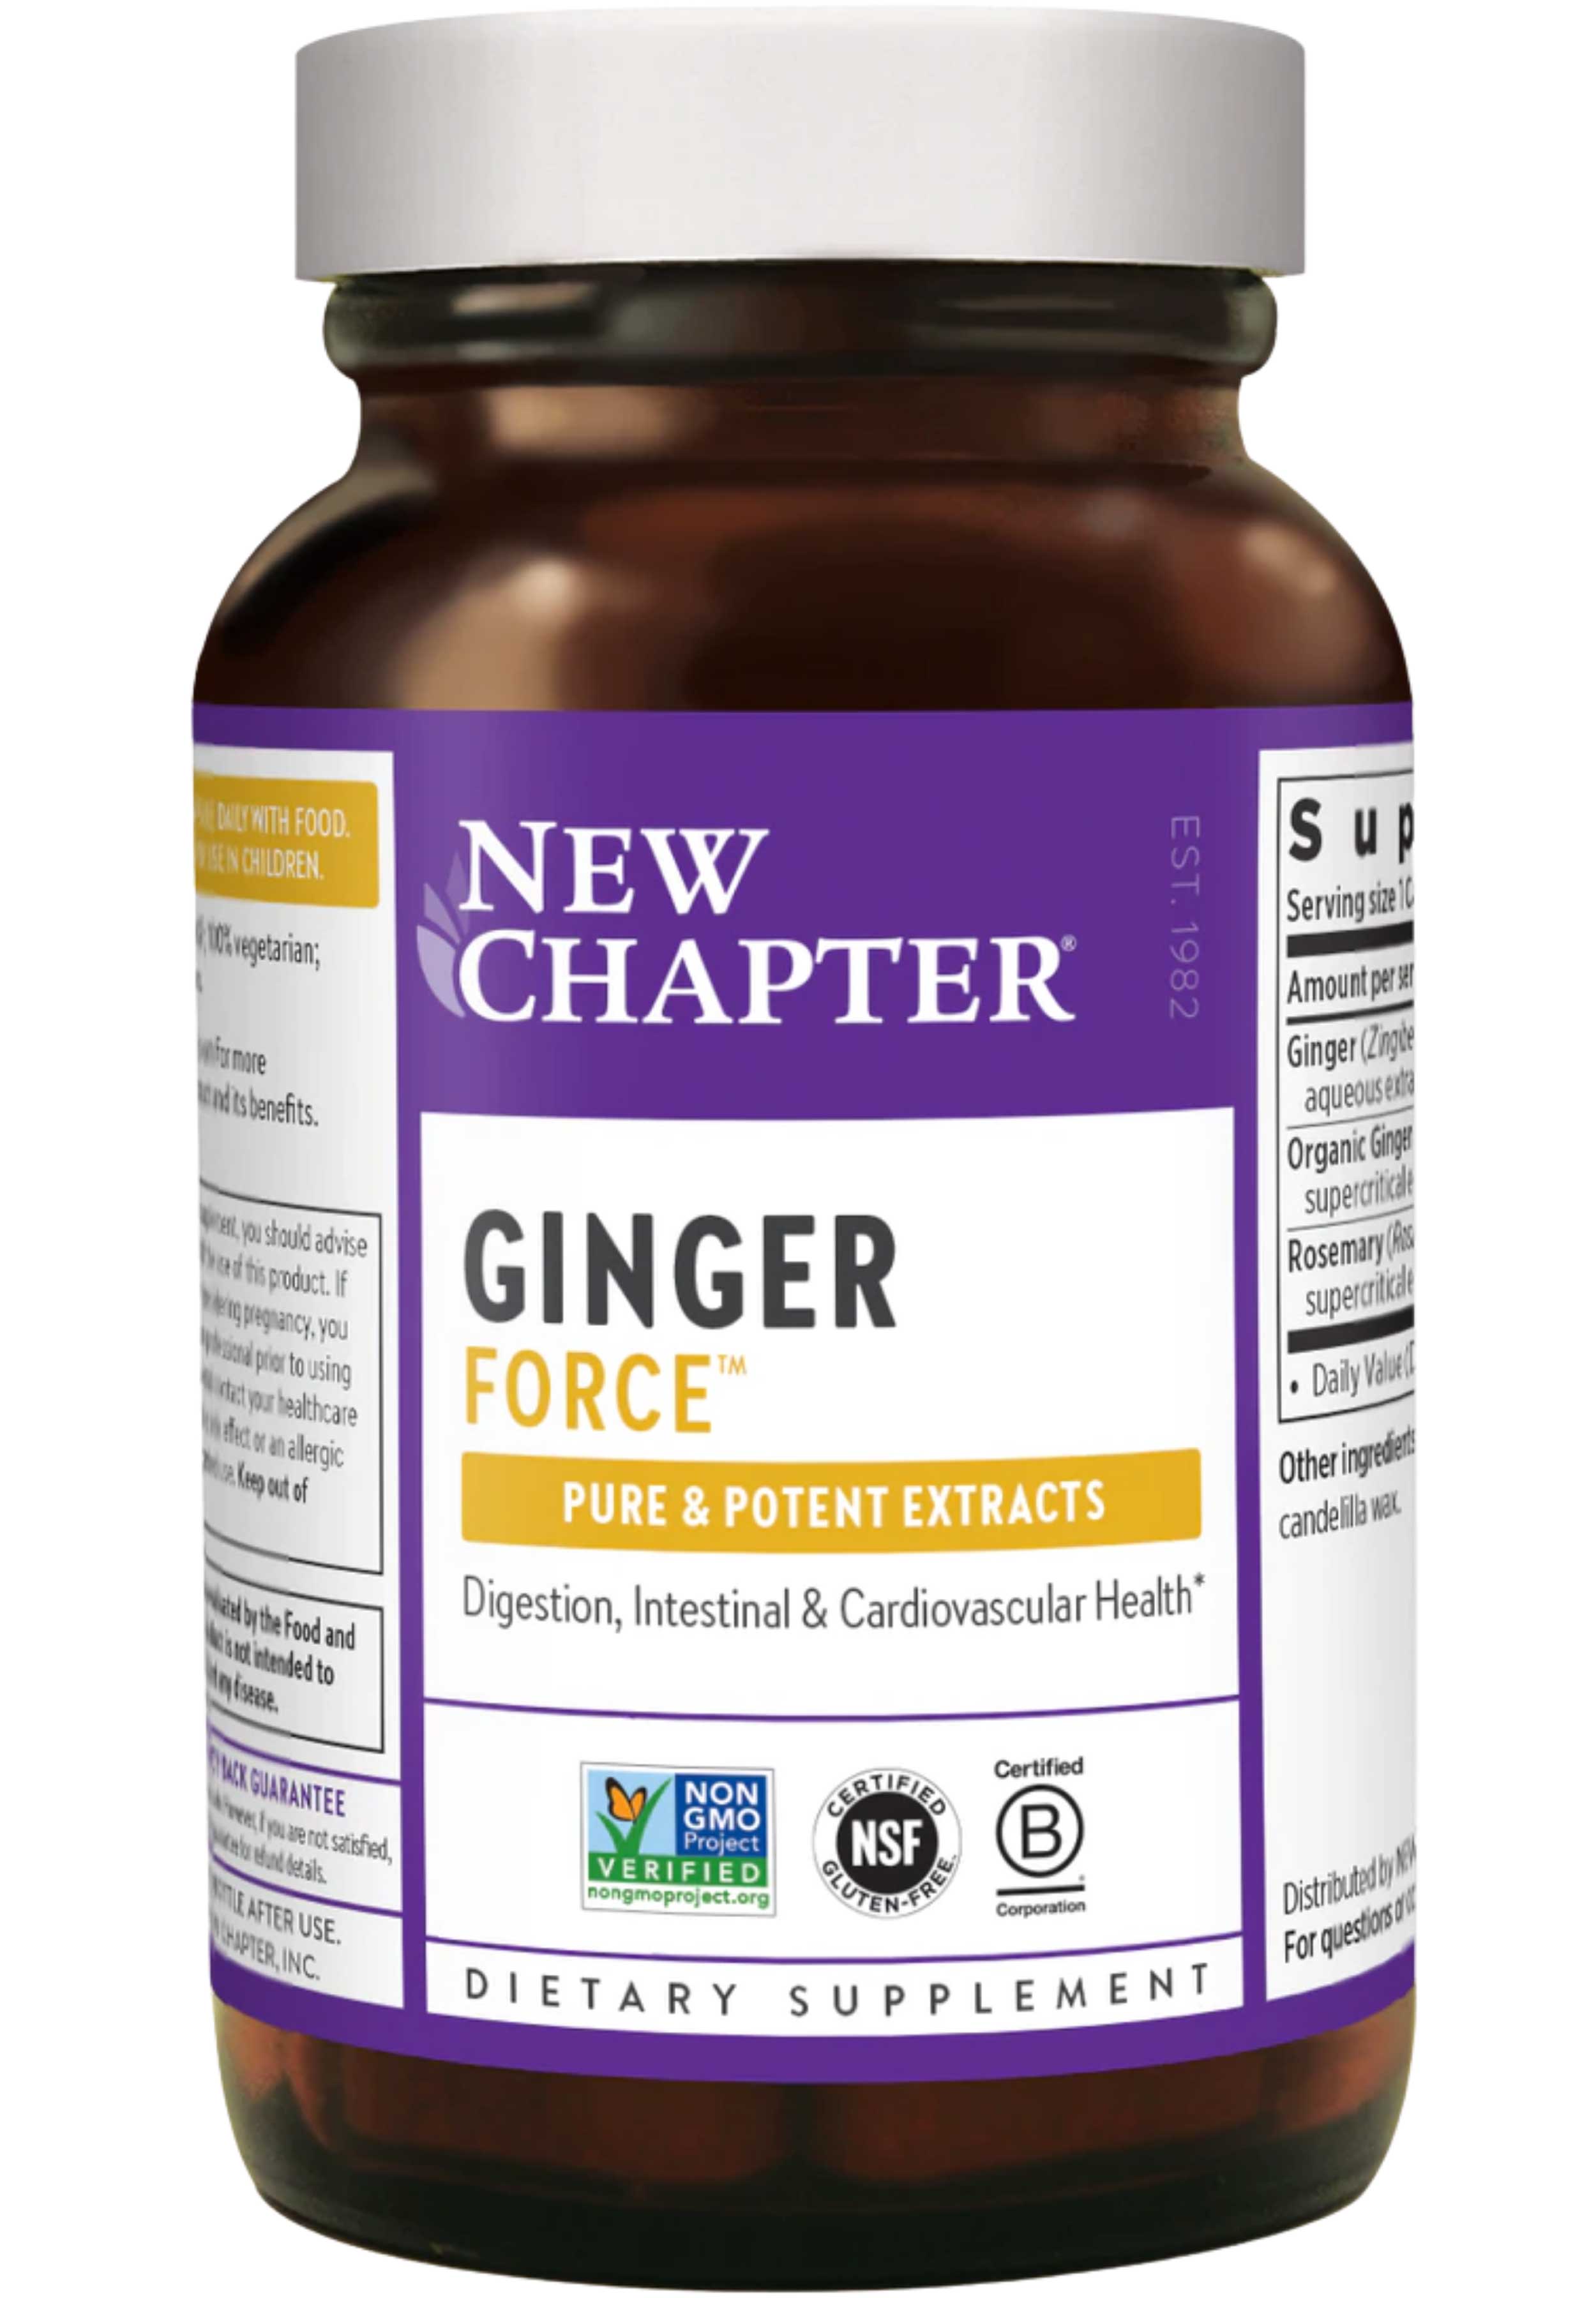 New Chapter Ginger Force